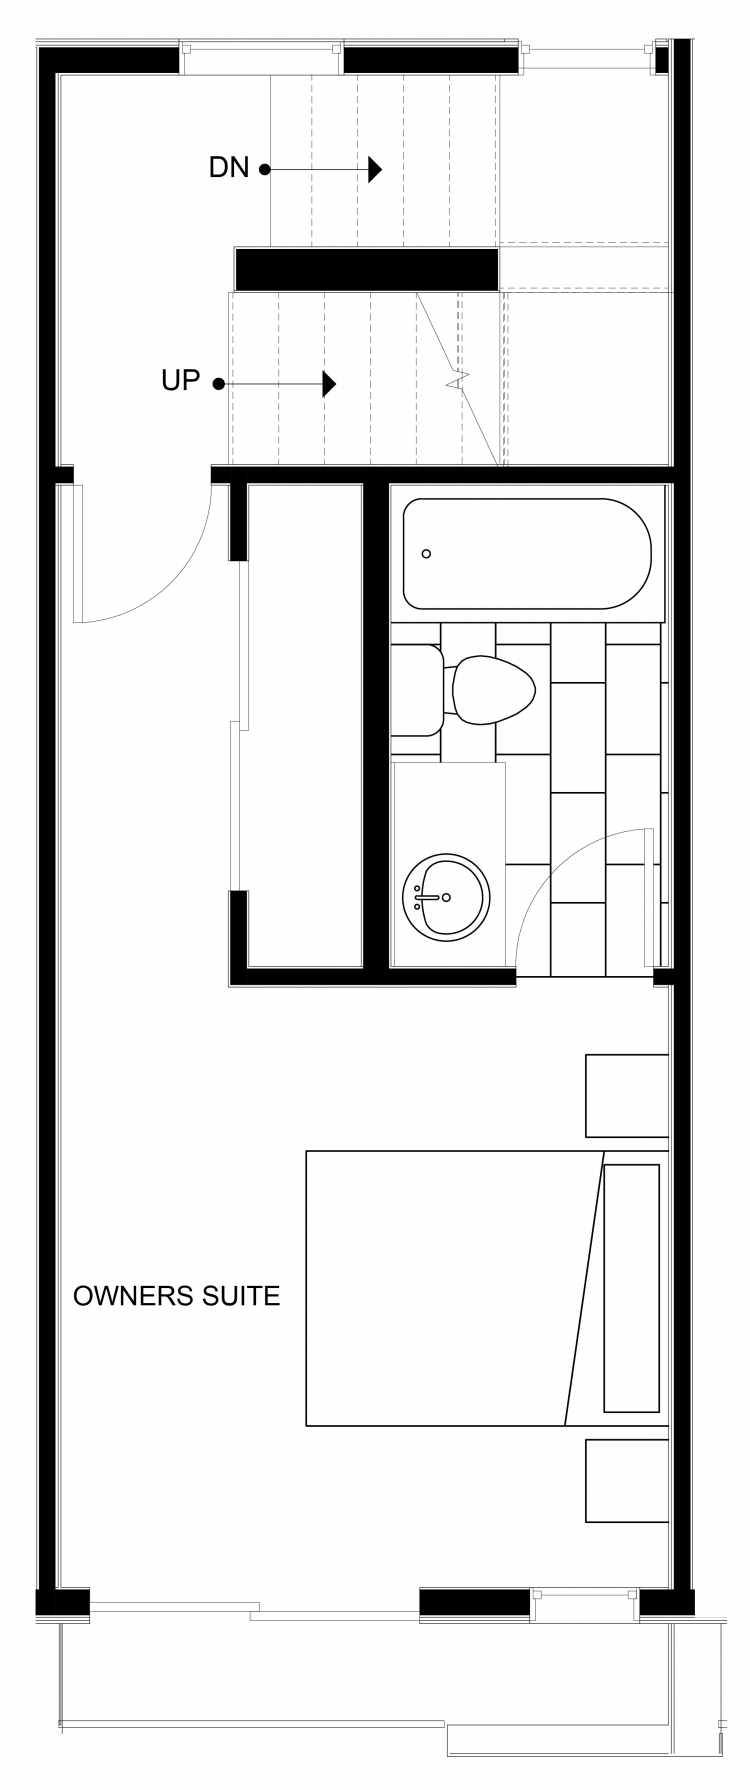 Fourth Floor Plan of 1542 15th Ave E, One of the Larrabee Townhomes in Capitol Hill